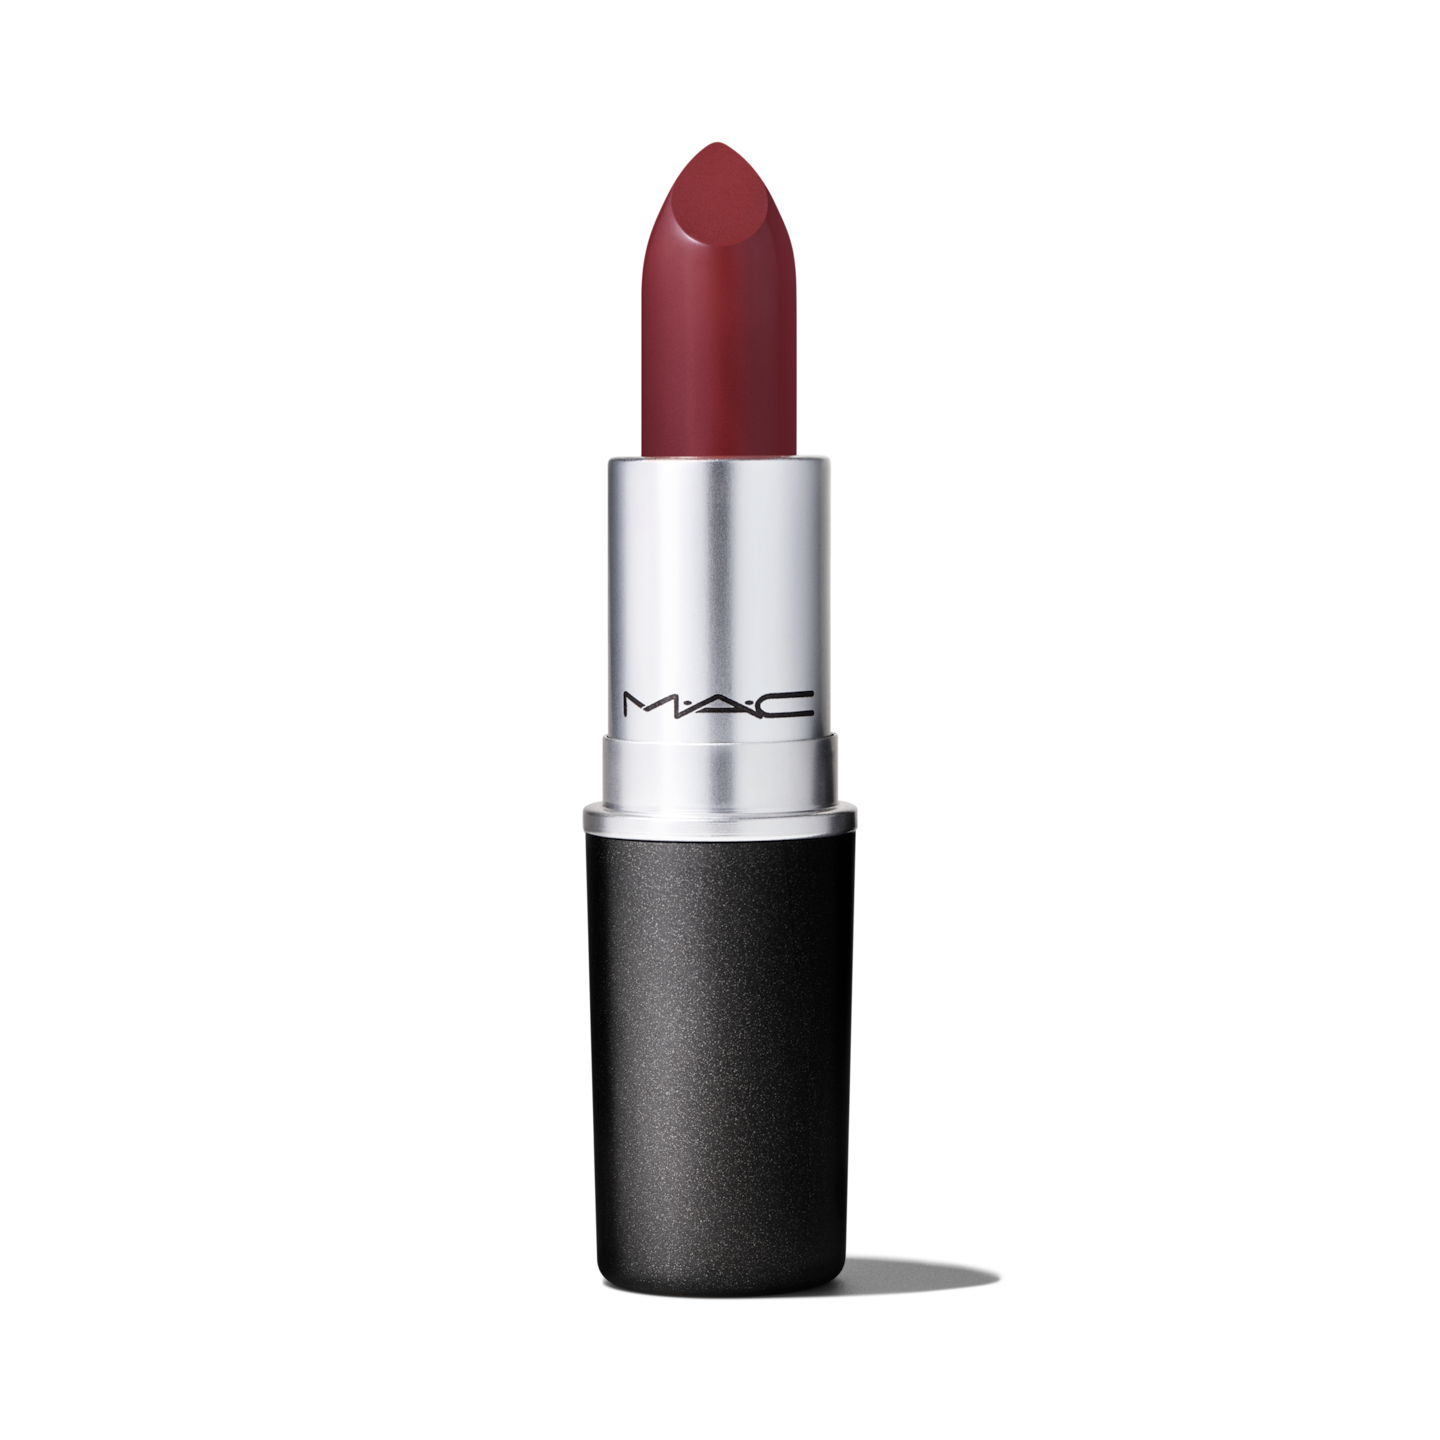 MAC Matte Lipstick | Including Marrakesh, Teddy, Mehr & Taupe | MAC Cosmetics - Official Site